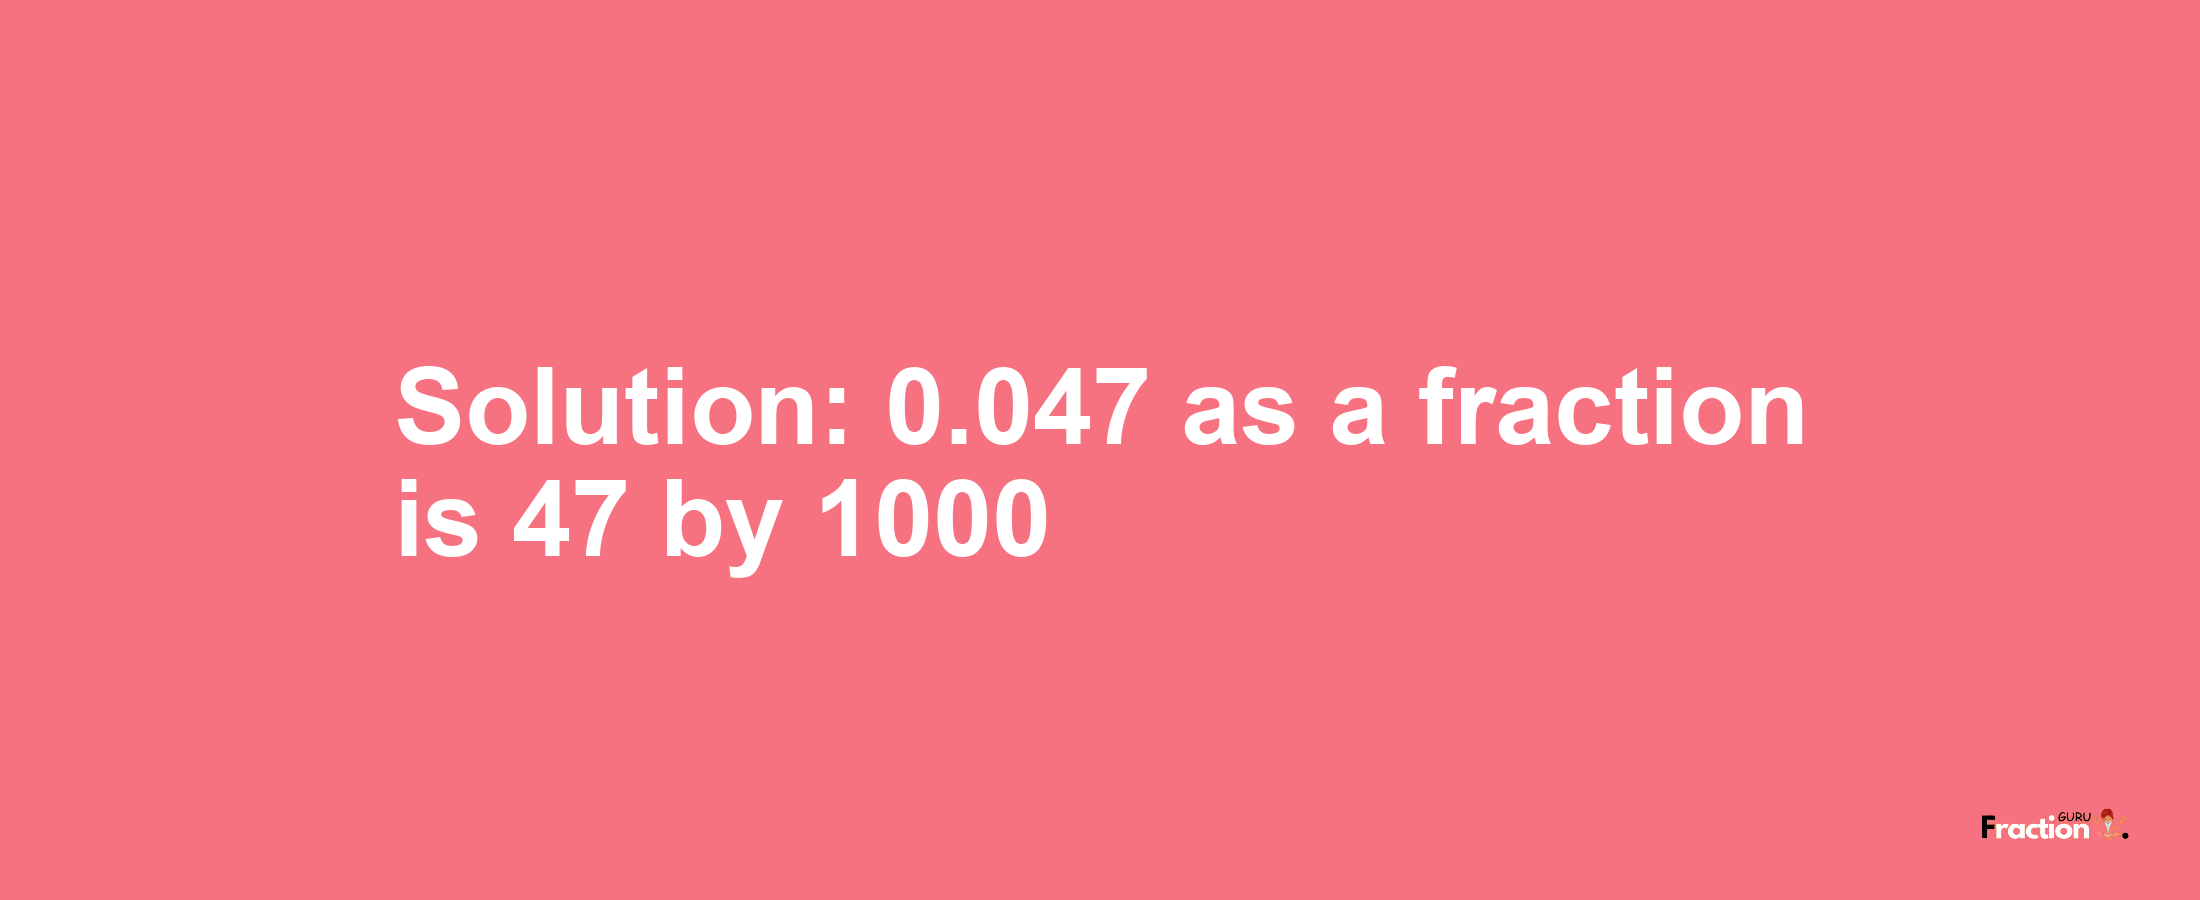 Solution:0.047 as a fraction is 47/1000